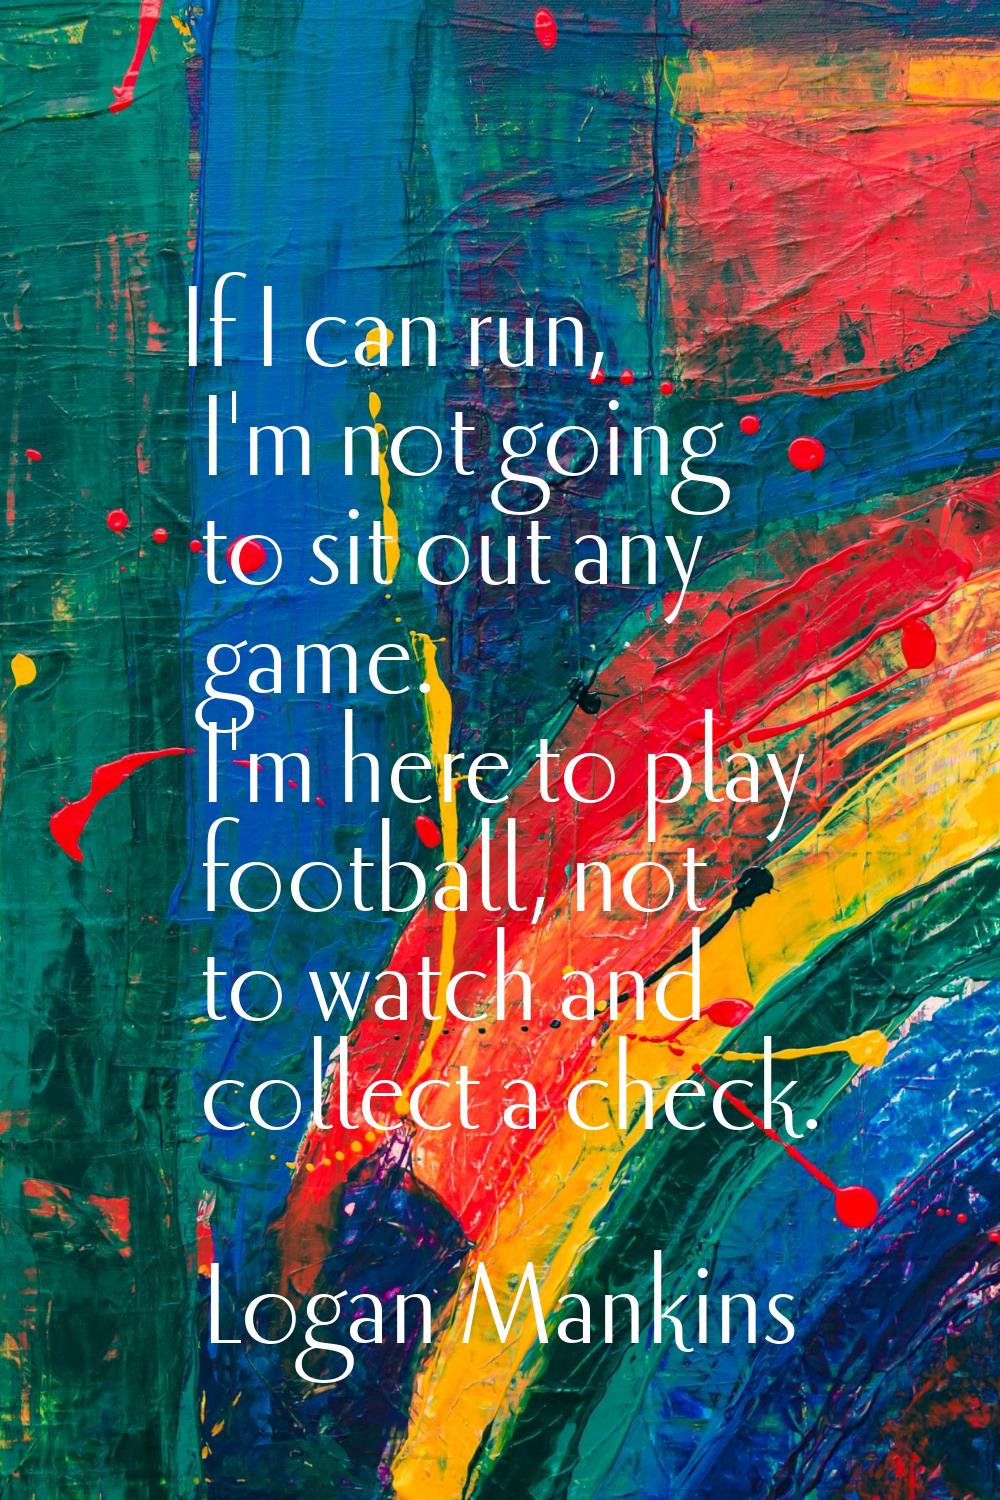 If I can run, I'm not going to sit out any game. I'm here to play football, not to watch and collec